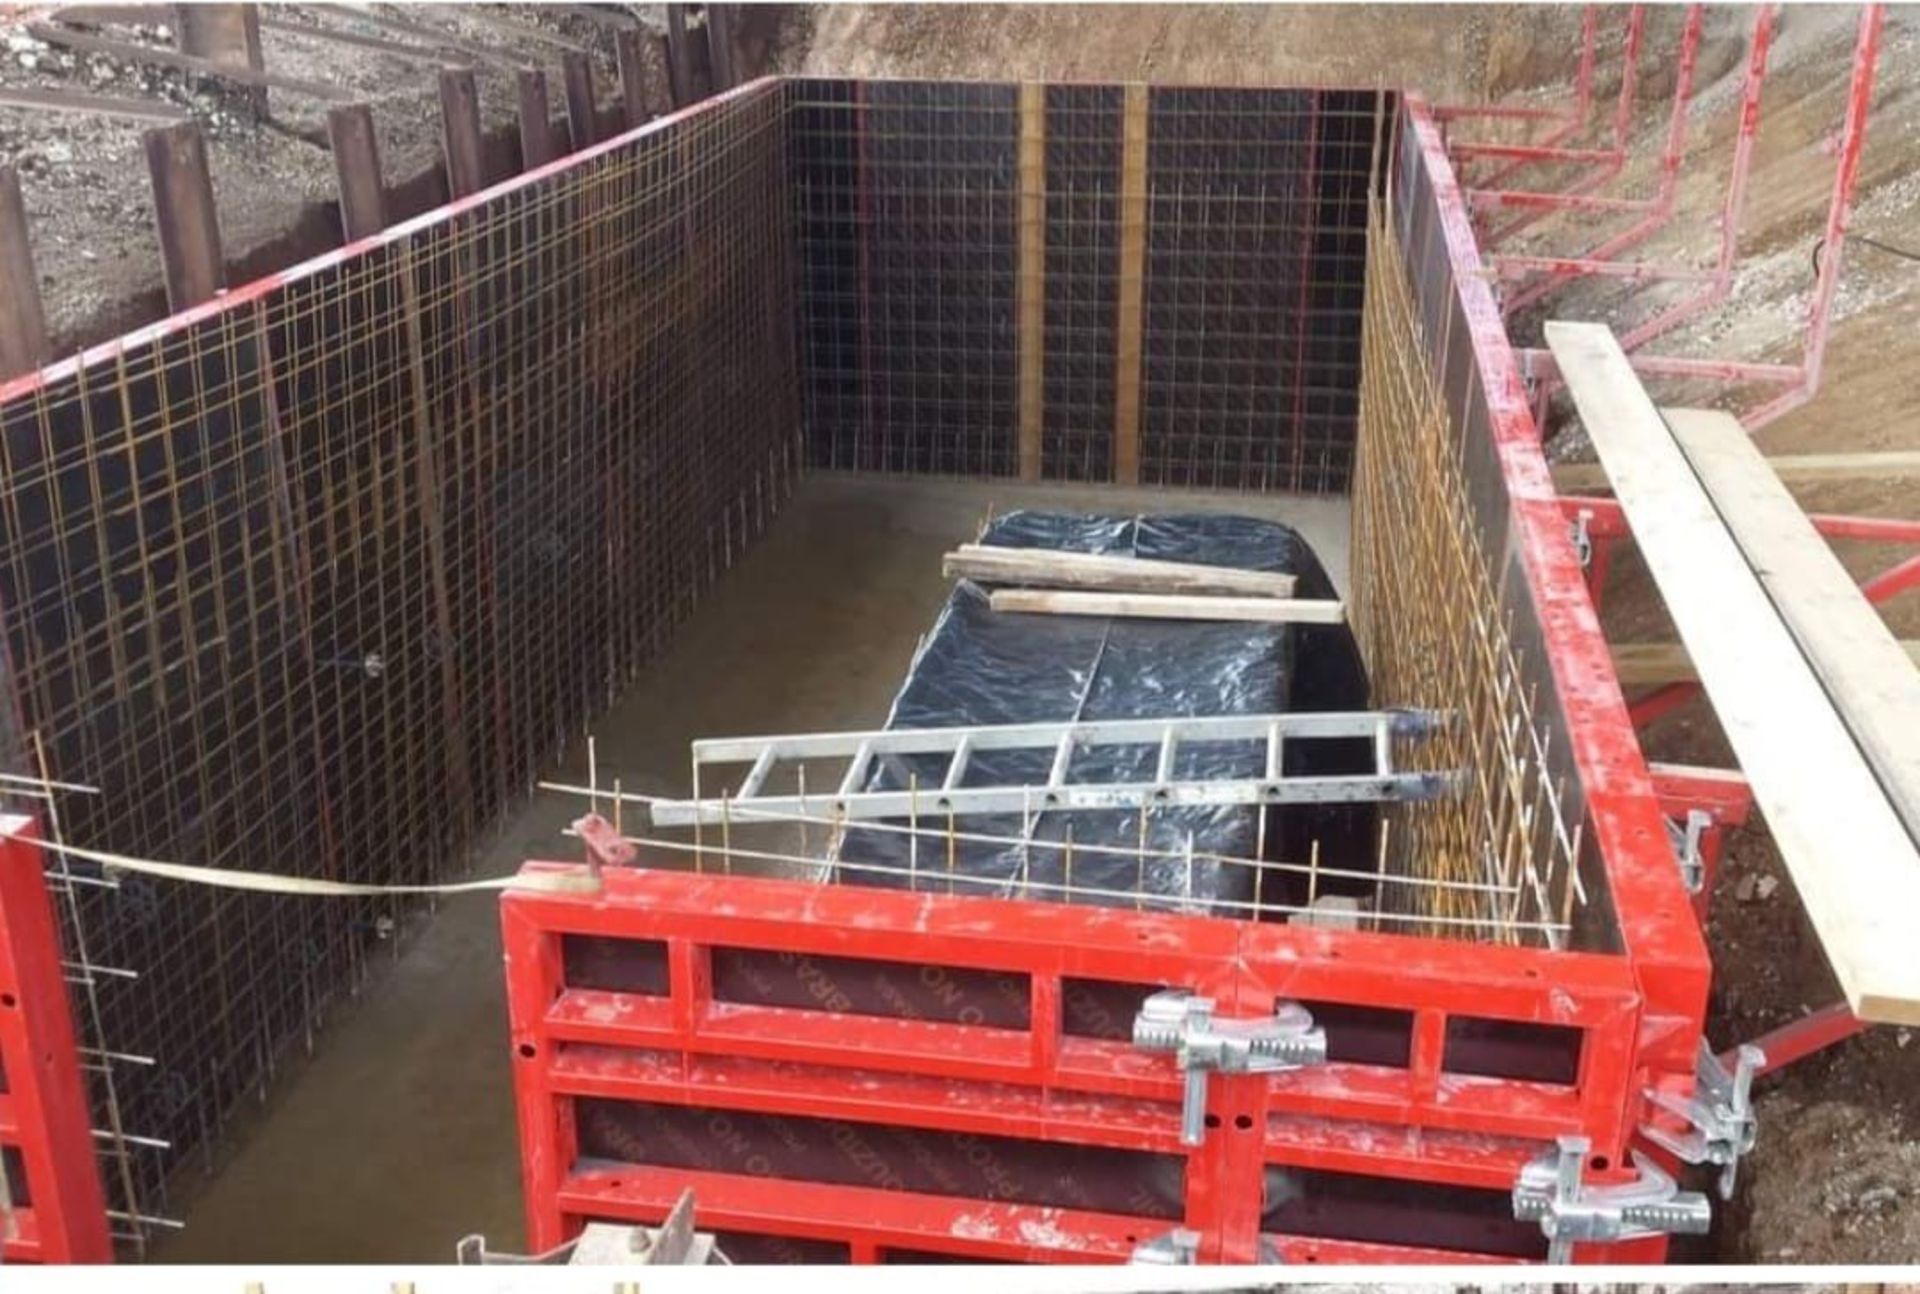 Quantity of 1.8 metre formwork panels & fittings Comprising of: 20 - 3000mm x 1800mm formwork panels - Image 10 of 12